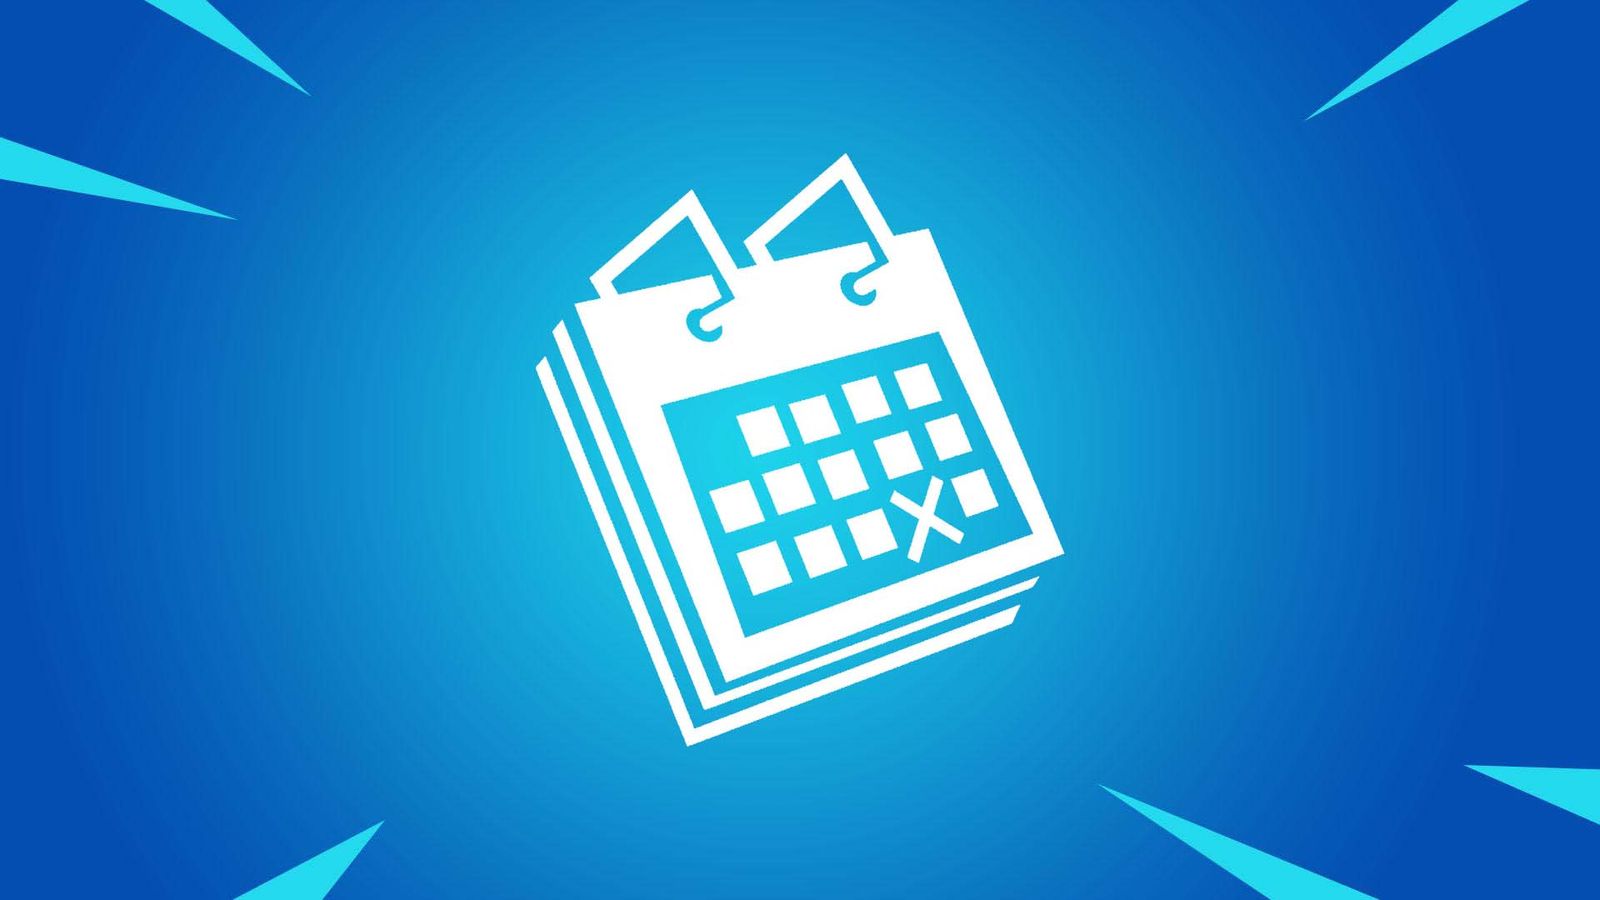 Calendar in a Fortnite art style with a date marked with an 'X'